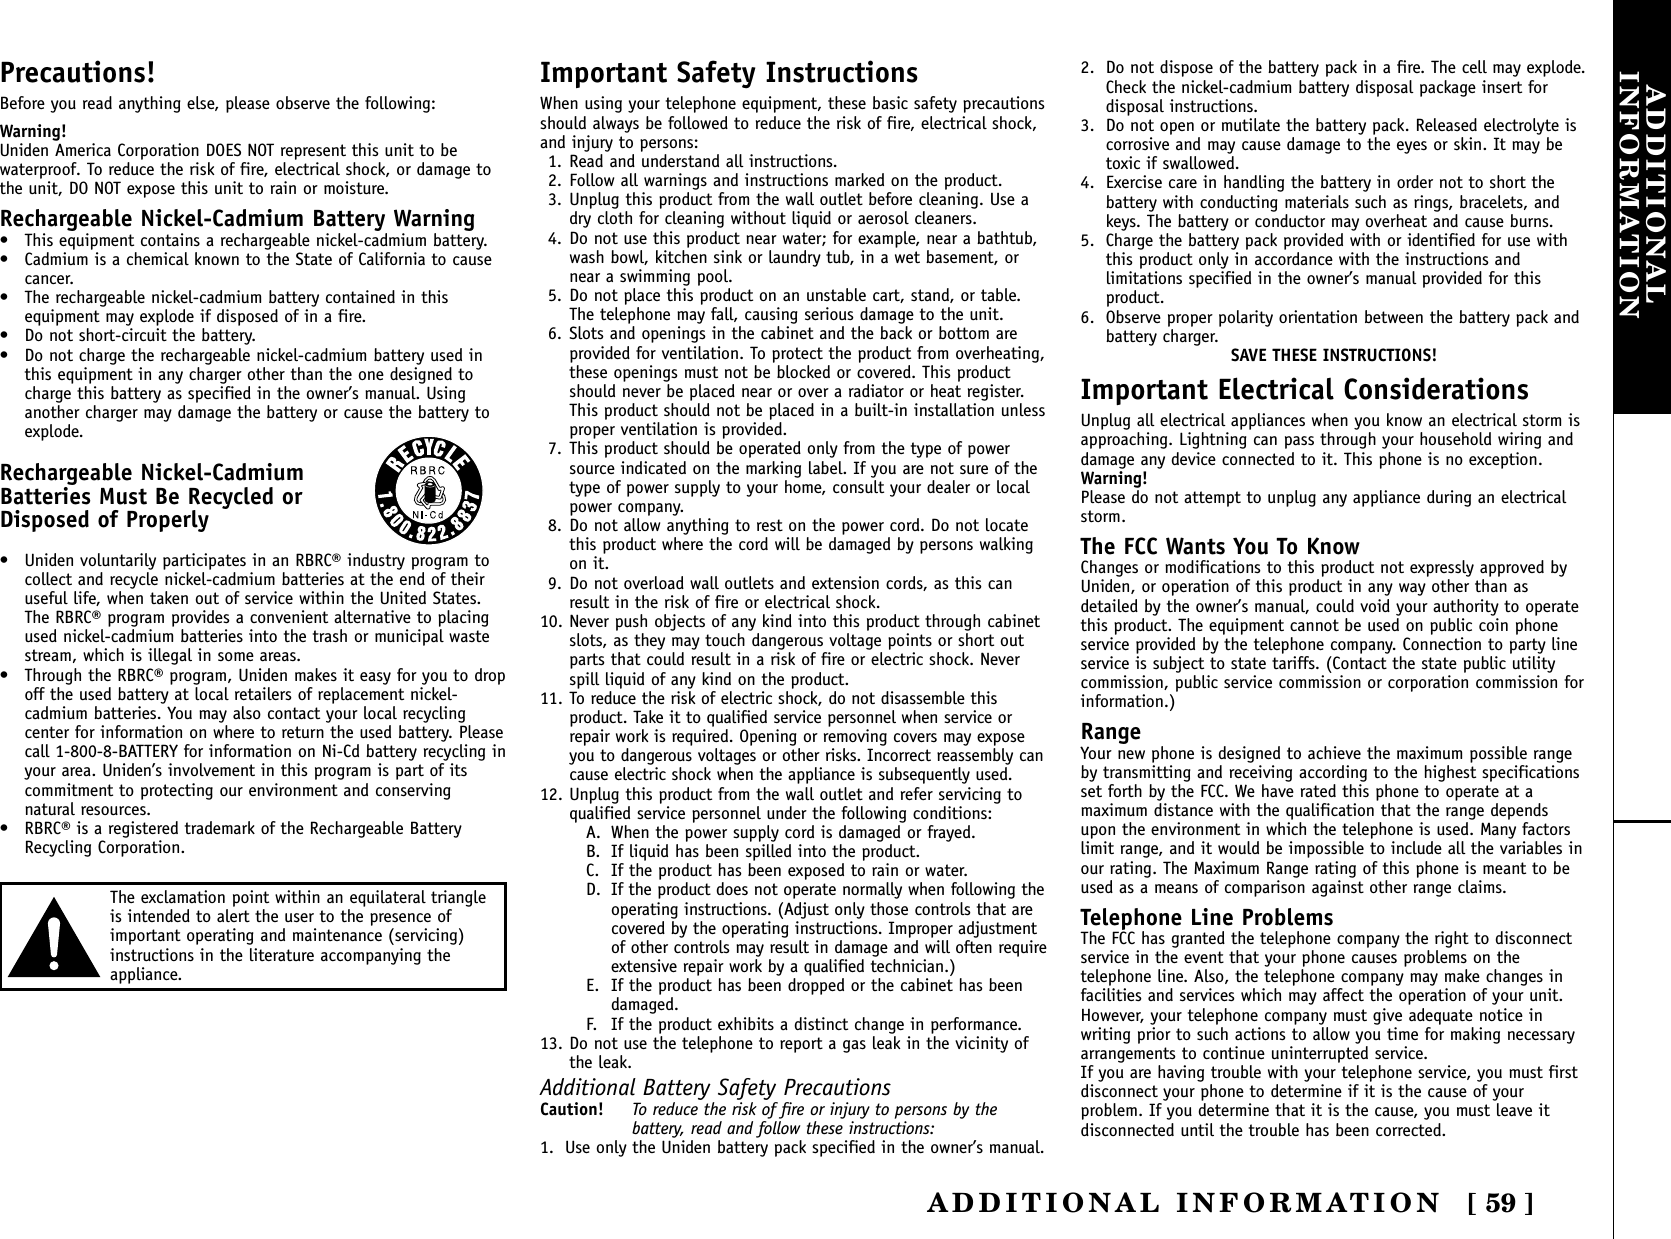 ADDITIONAL INFORMATION [ 59 ]ADDITIONALINFORMATIONPrecautions!Before you read anything else, please observe the following:Warning!Uniden America Corporation DOES NOT represent this unit to bewaterproof. To reduce the risk of fire, electrical shock, or damage tothe unit, DO NOT expose this unit to rain or moisture. Rechargeable Nickel-Cadmium Battery Warning• This equipment contains a rechargeable nickel-cadmium battery.• Cadmium is a chemical known to the State of California to causecancer.• The rechargeable nickel-cadmium battery contained in thisequipment may explode if disposed of in a fire.• Do not short-circuit the battery.• Do not charge the rechargeable nickel-cadmium battery used inthis equipment in any charger other than the one designed tocharge this battery as specified in the owner’s manual. Usinganother charger may damage the battery or cause the battery toexplode.Rechargeable Nickel-CadmiumBatteries Must Be Recycled or Disposed of Properly• Uniden voluntarily participates in an RBRC® industry program tocollect and recycle nickel-cadmium batteries at the end of theiruseful life, when taken out of service within the United States.The RBRC® program provides a convenient alternative to placingused nickel-cadmium batteries into the trash or municipal wastestream, which is illegal in some areas.• Through the RBRC® program, Uniden makes it easy for you to dropoff the used battery at local retailers of replacement nickel-cadmium batteries. You may also contact your local recyclingcenter for information on where to return the used battery. Pleasecall 1-800-8-BATTERY for information on Ni-Cd battery recycling inyour area. Uniden’s involvement in this program is part of itscommitment to protecting our environment and conservingnatural resources.• RBRC® is a registered trademark of the Rechargeable BatteryRecycling Corporation.Important Safety InstructionsWhen using your telephone equipment, these basic safety precautionsshould always be followed to reduce the risk of fire, electrical shock,and injury to persons:1. Read and understand all instructions.2. Follow all warnings and instructions marked on the product.3. Unplug this product from the wall outlet before cleaning. Use adry cloth for cleaning without liquid or aerosol cleaners.4. Do not use this product near water; for example, near a bathtub,wash bowl, kitchen sink or laundry tub, in a wet basement, ornear a swimming pool.5. Do not place this product on an unstable cart, stand, or table.The telephone may fall, causing serious damage to the unit.6. Slots and openings in the cabinet and the back or bottom areprovided for ventilation. To protect the product from overheating,these openings must not be blocked or covered. This productshould never be placed near or over a radiator or heat register.This product should not be placed in a built-in installation unlessproper ventilation is provided.7. This product should be operated only from the type of powersource indicated on the marking label. If you are not sure of thetype of power supply to your home, consult your dealer or localpower company.8. Do not allow anything to rest on the power cord. Do not locatethis product where the cord will be damaged by persons walkingon it.9. Do not overload wall outlets and extension cords, as this canresult in the risk of fire or electrical shock.10. Never push objects of any kind into this product through cabinetslots, as they may touch dangerous voltage points or short outparts that could result in a risk of fire or electric shock. Neverspill liquid of any kind on the product.11. To reduce the risk of electric shock, do not disassemble thisproduct. Take it to qualified service personnel when service orrepair work is required. Opening or removing covers may exposeyou to dangerous voltages or other risks. Incorrect reassembly cancause electric shock when the appliance is subsequently used.12. Unplug this product from the wall outlet and refer servicing toqualified service personnel under the following conditions:A. When the power supply cord is damaged or frayed.B. If liquid has been spilled into the product.C. If the product has been exposed to rain or water.D. If the product does not operate normally when following theoperating instructions. (Adjust only those controls that arecovered by the operating instructions. Improper adjustmentof other controls may result in damage and will often requireextensive repair work by a qualified technician.)E. If the product has been dropped or the cabinet has beendamaged.F. If the product exhibits a distinct change in performance.13. Do not use the telephone to report a gas leak in the vicinity ofthe leak.Additional Battery Safety PrecautionsCaution! To reduce the risk of fire or injury to persons by thebattery, read and follow these instructions:1. Use only the Uniden battery pack specified in the owner’s manual. 2. Do not dispose of the battery pack in a fire. The cell may explode.Check the nickel-cadmium battery disposal package insert fordisposal instructions.3. Do not open or mutilate the battery pack. Released electrolyte iscorrosive and may cause damage to the eyes or skin. It may betoxic if swallowed.4. Exercise care in handling the battery in order not to short thebattery with conducting materials such as rings, bracelets, andkeys. The battery or conductor may overheat and cause burns.5. Charge the battery pack provided with or identified for use withthis product only in accordance with the instructions andlimitations specified in the owner’s manual provided for thisproduct.6. Observe proper polarity orientation between the battery pack andbattery charger.SAVE THESE INSTRUCTIONS!Important Electrical ConsiderationsUnplug all electrical appliances when you know an electrical storm isapproaching. Lightning can pass through your household wiring anddamage any device connected to it. This phone is no exception.Warning!Please do not attempt to unplug any appliance during an electricalstorm.The FCC Wants You To KnowChanges or modifications to this product not expressly approved byUniden, or operation of this product in any way other than asdetailed by the owner’s manual, could void your authority to operatethis product. The equipment cannot be used on public coin phoneservice provided by the telephone company. Connection to party lineservice is subject to state tariffs. (Contact the state public utilitycommission, public service commission or corporation commission forinformation.)RangeYour new phone is designed to achieve the maximum possible rangeby transmitting and receiving according to the highest specificationsset forth by the FCC. We have rated this phone to operate at amaximum distance with the qualification that the range dependsupon the environment in which the telephone is used. Many factorslimit range, and it would be impossible to include all the variables inour rating. The Maximum Range rating of this phone is meant to beused as a means of comparison against other range claims.Telephone Line ProblemsThe FCC has granted the telephone company the right to disconnectservice in the event that your phone causes problems on thetelephone line. Also, the telephone company may make changes infacilities and services which may affect the operation of your unit.However, your telephone company must give adequate notice inwriting prior to such actions to allow you time for making necessaryarrangements to continue uninterrupted service.If you are having trouble with your telephone service, you must firstdisconnect your phone to determine if it is the cause of yourproblem. If you determine that it is the cause, you must leave itdisconnected until the trouble has been corrected.The exclamation point within an equilateral triangleis intended to alert the user to the presence ofimportant operating and maintenance (servicing)instructions in the literature accompanying theappliance.